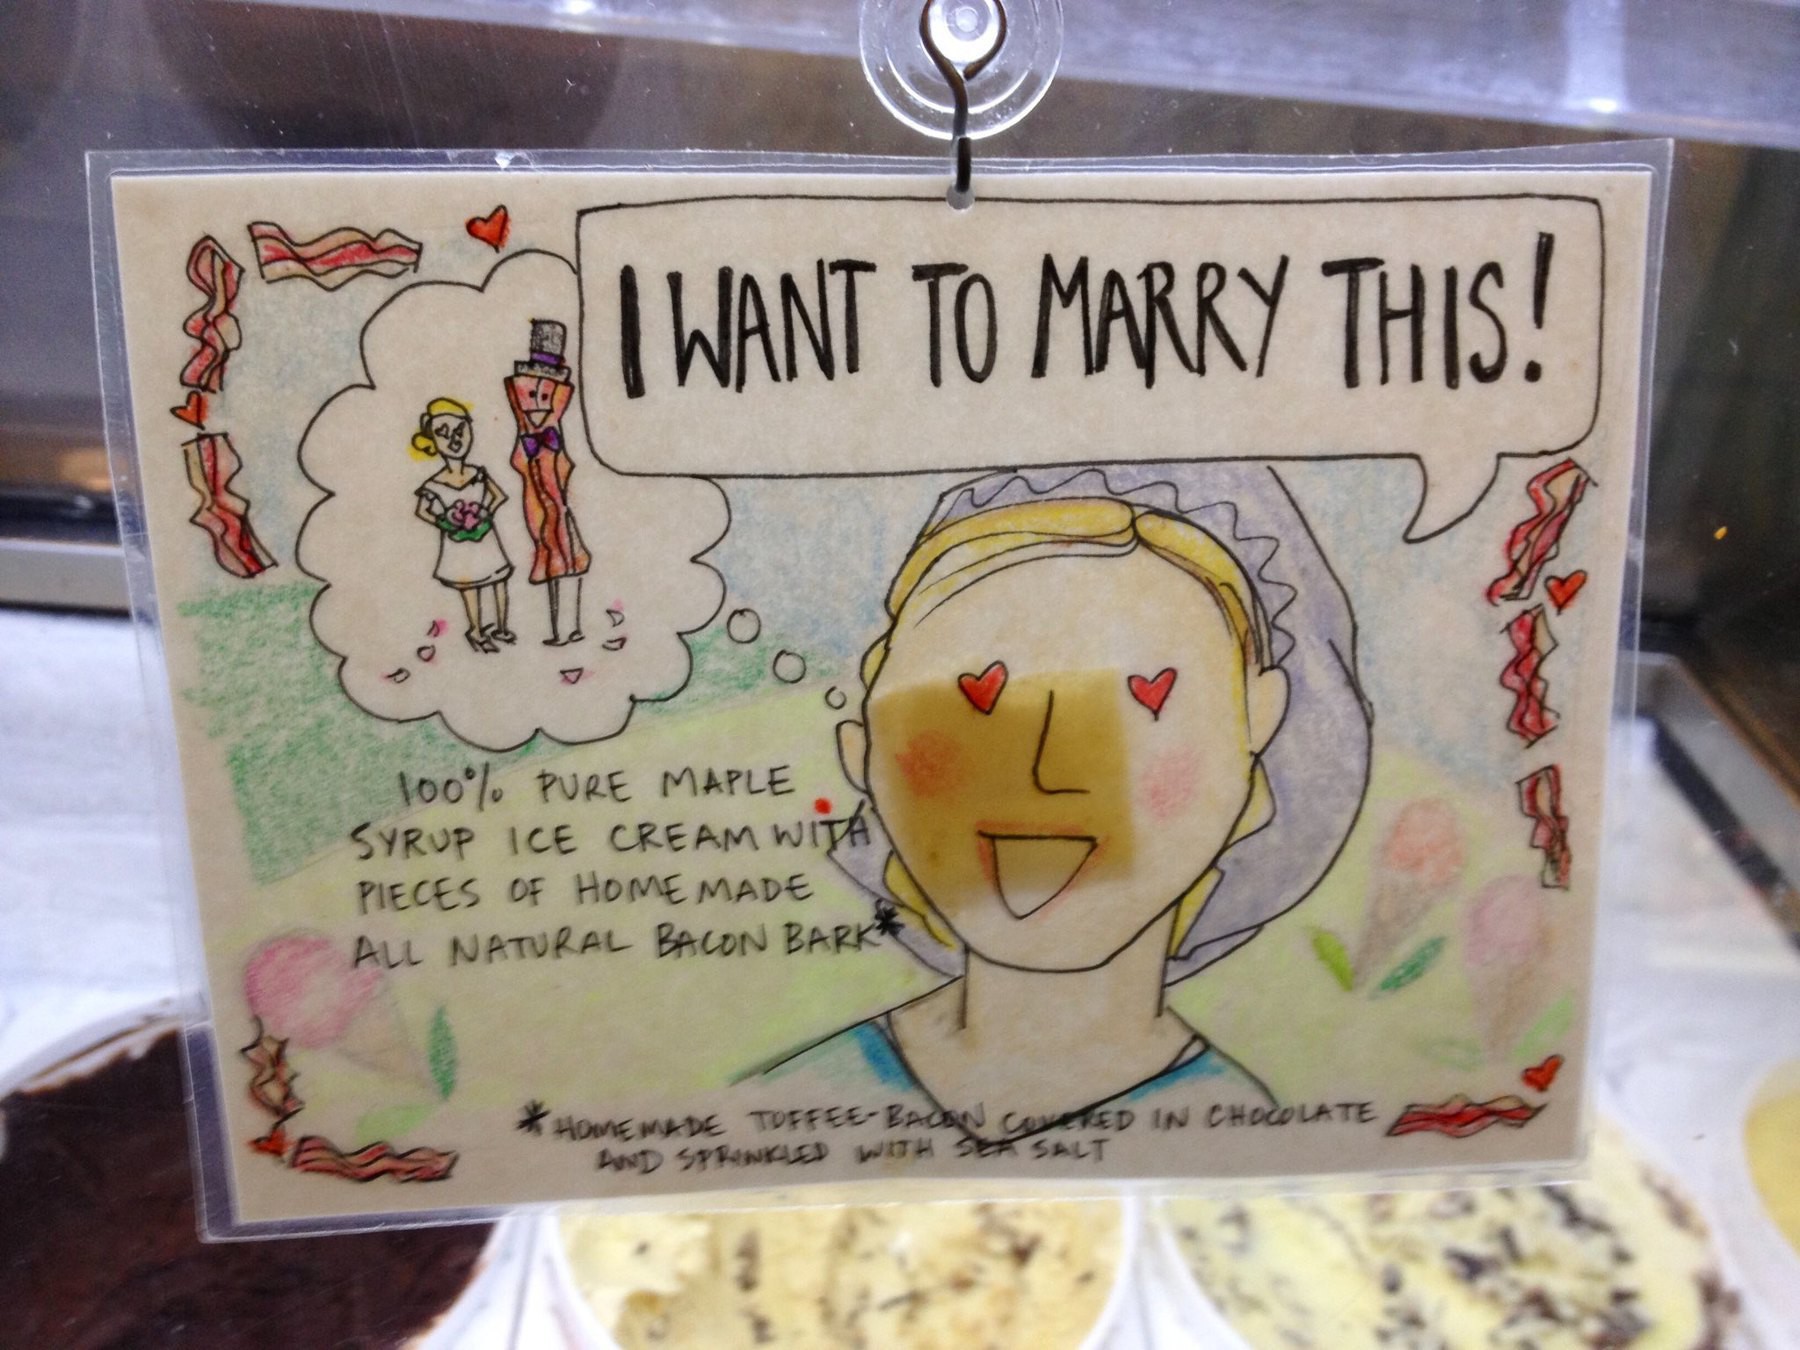 Card for ice cream named: "I want to marry this, 100% pure maple syrup ice cream with pieces of homemade all natural bacon bark."